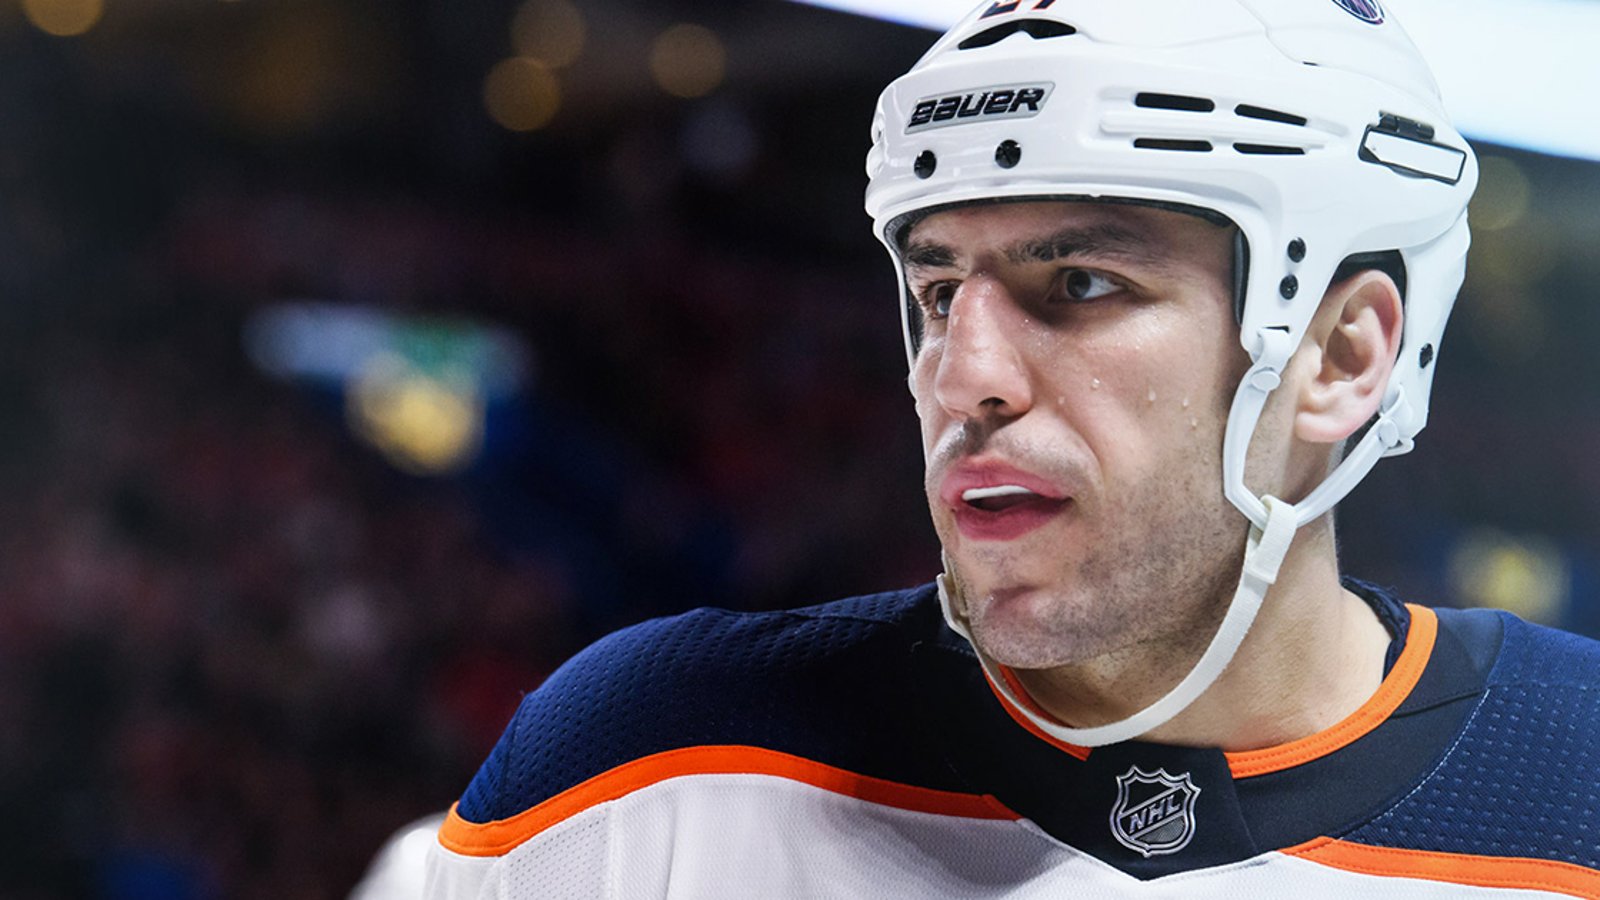 Milan Lucic calls out Canadian media for biased coverage.